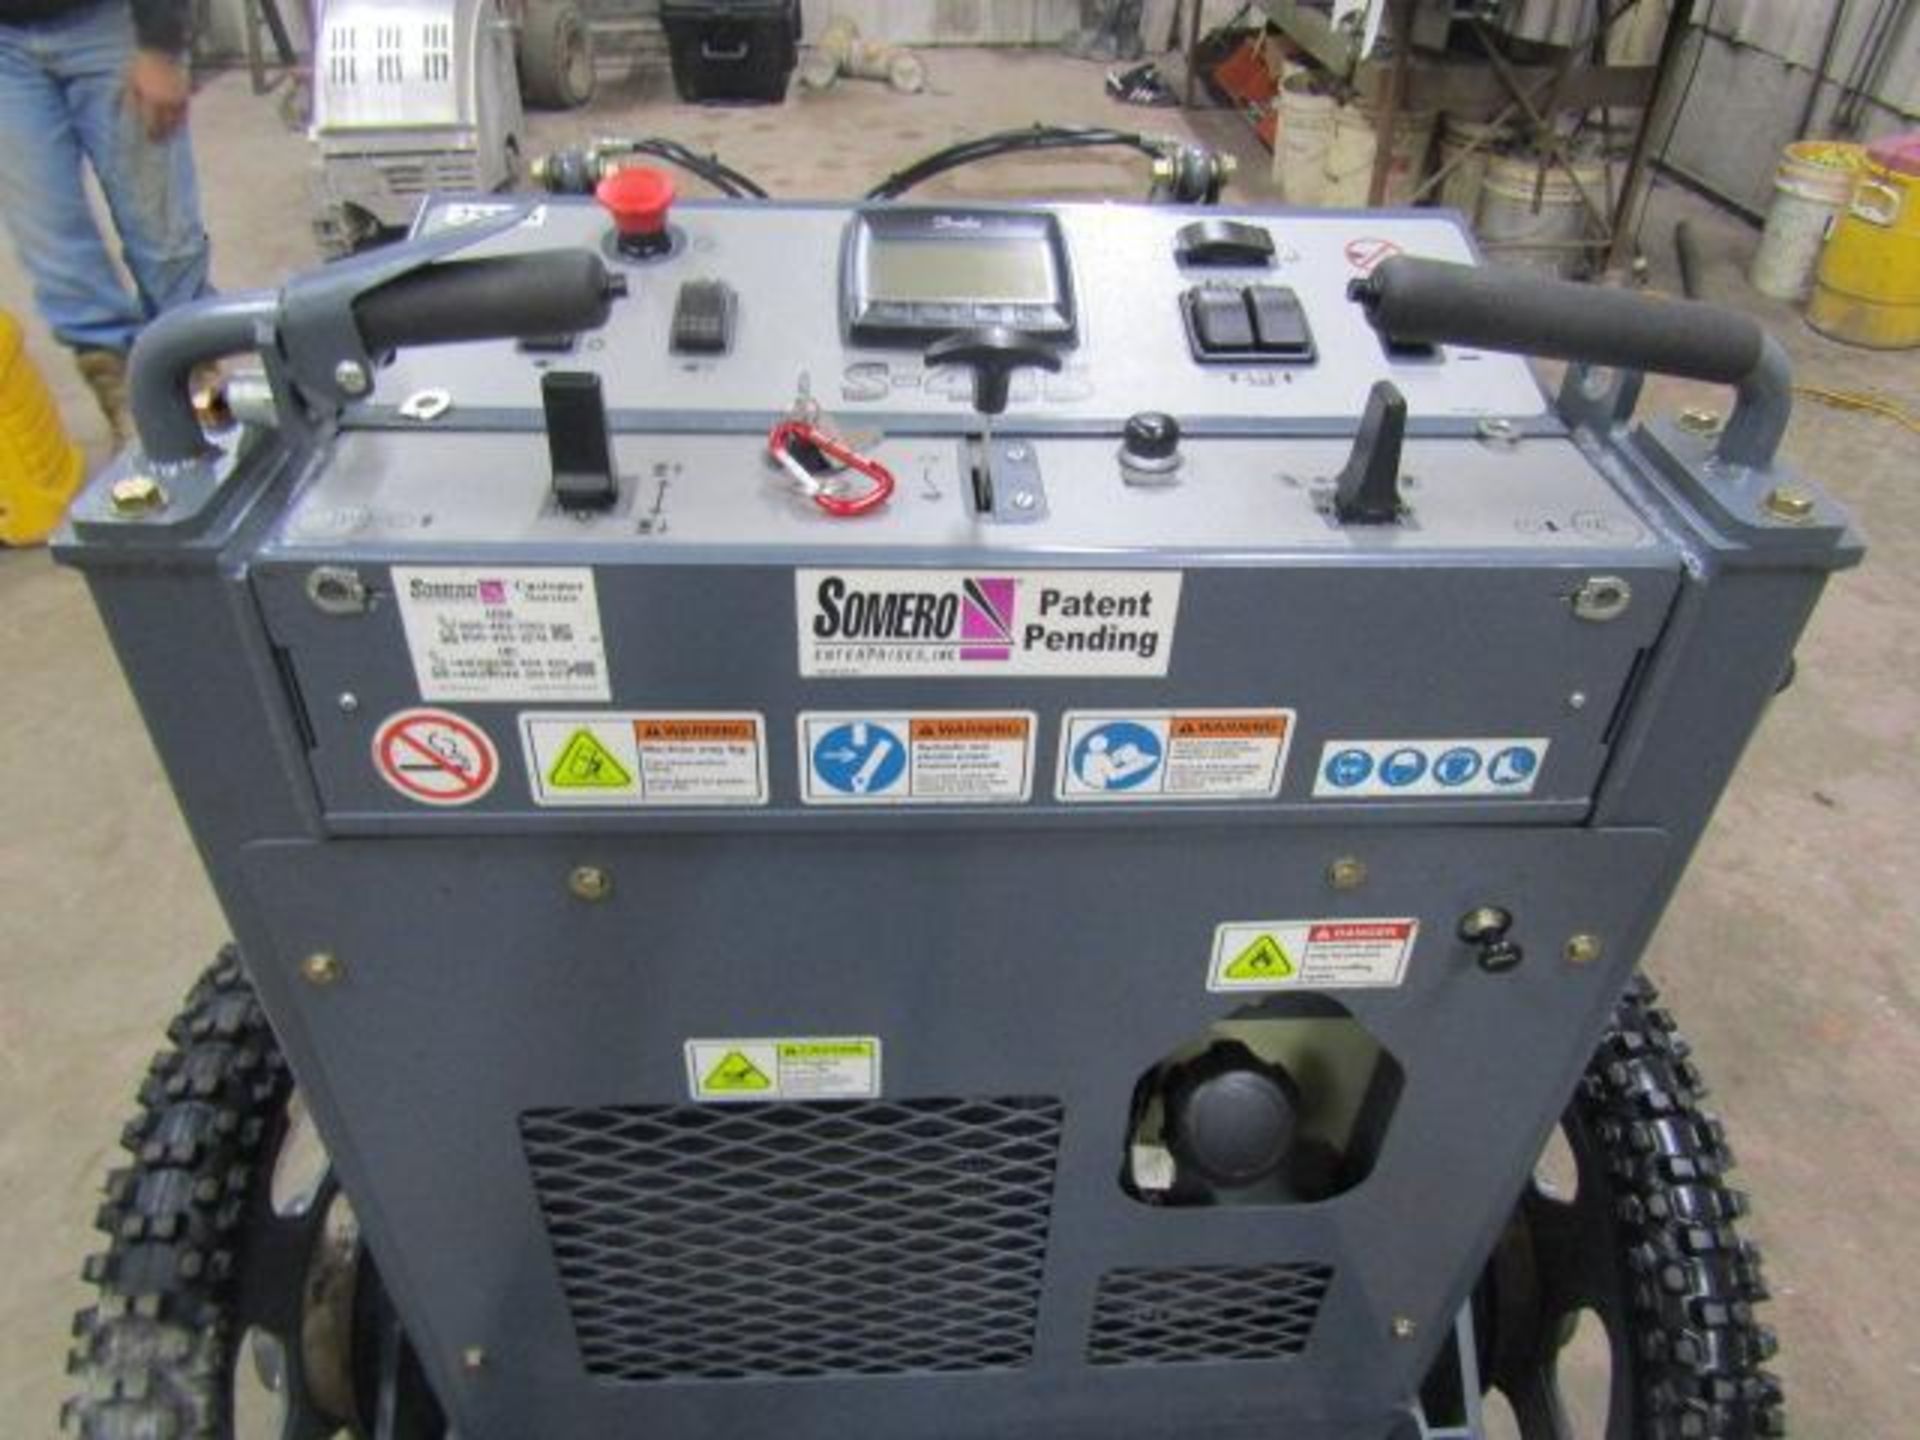 2017 Somero S-485 Laser Screed, Serial #25156-0517, ONE OWNER, 108 hrs, w/ GL622 Laser - Image 15 of 32